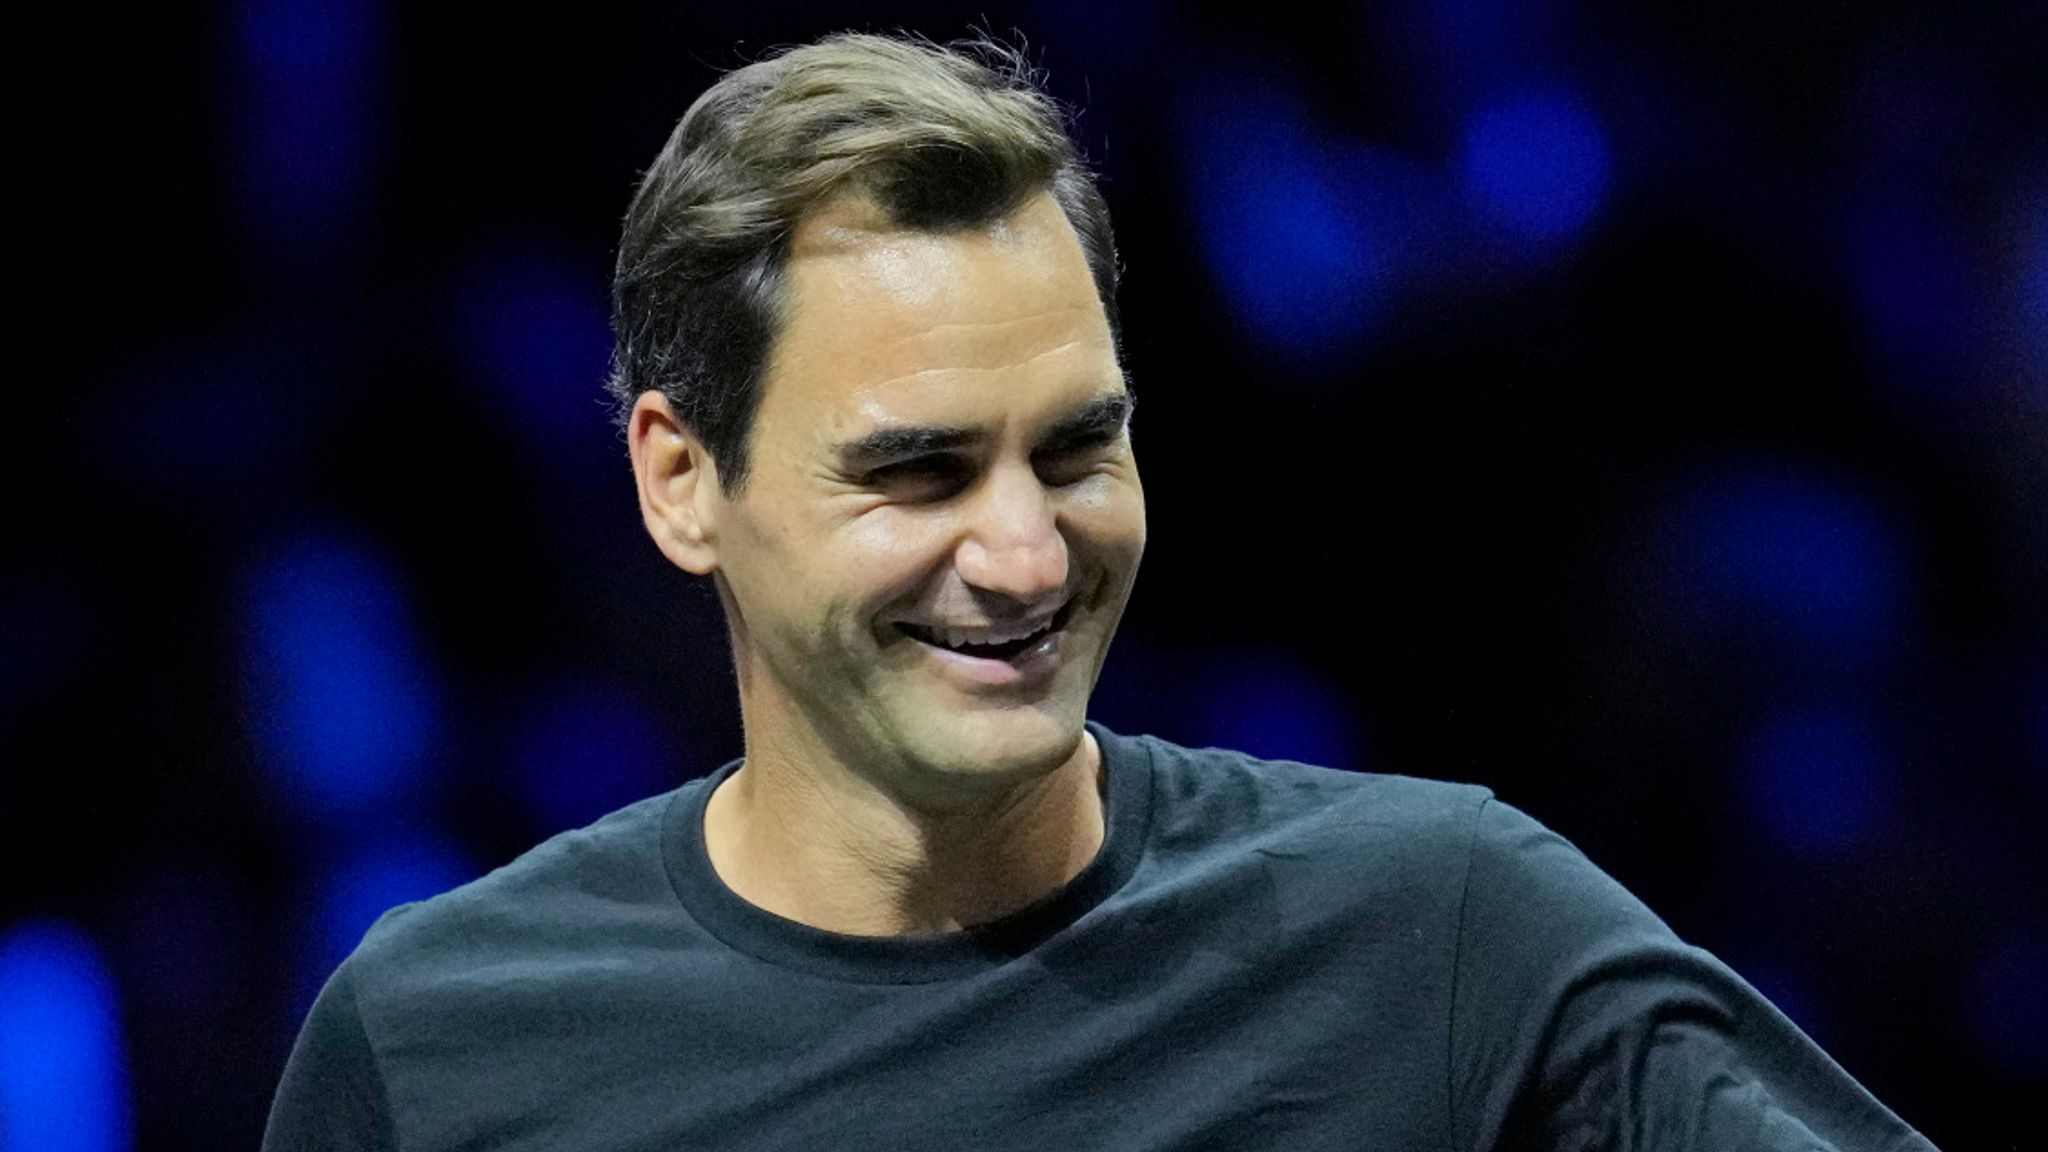 Roger Federer prepares for his last ever competitive match - what he did  for tennis is unrivalled | Jacquie Beltrao | UK News | Sky News